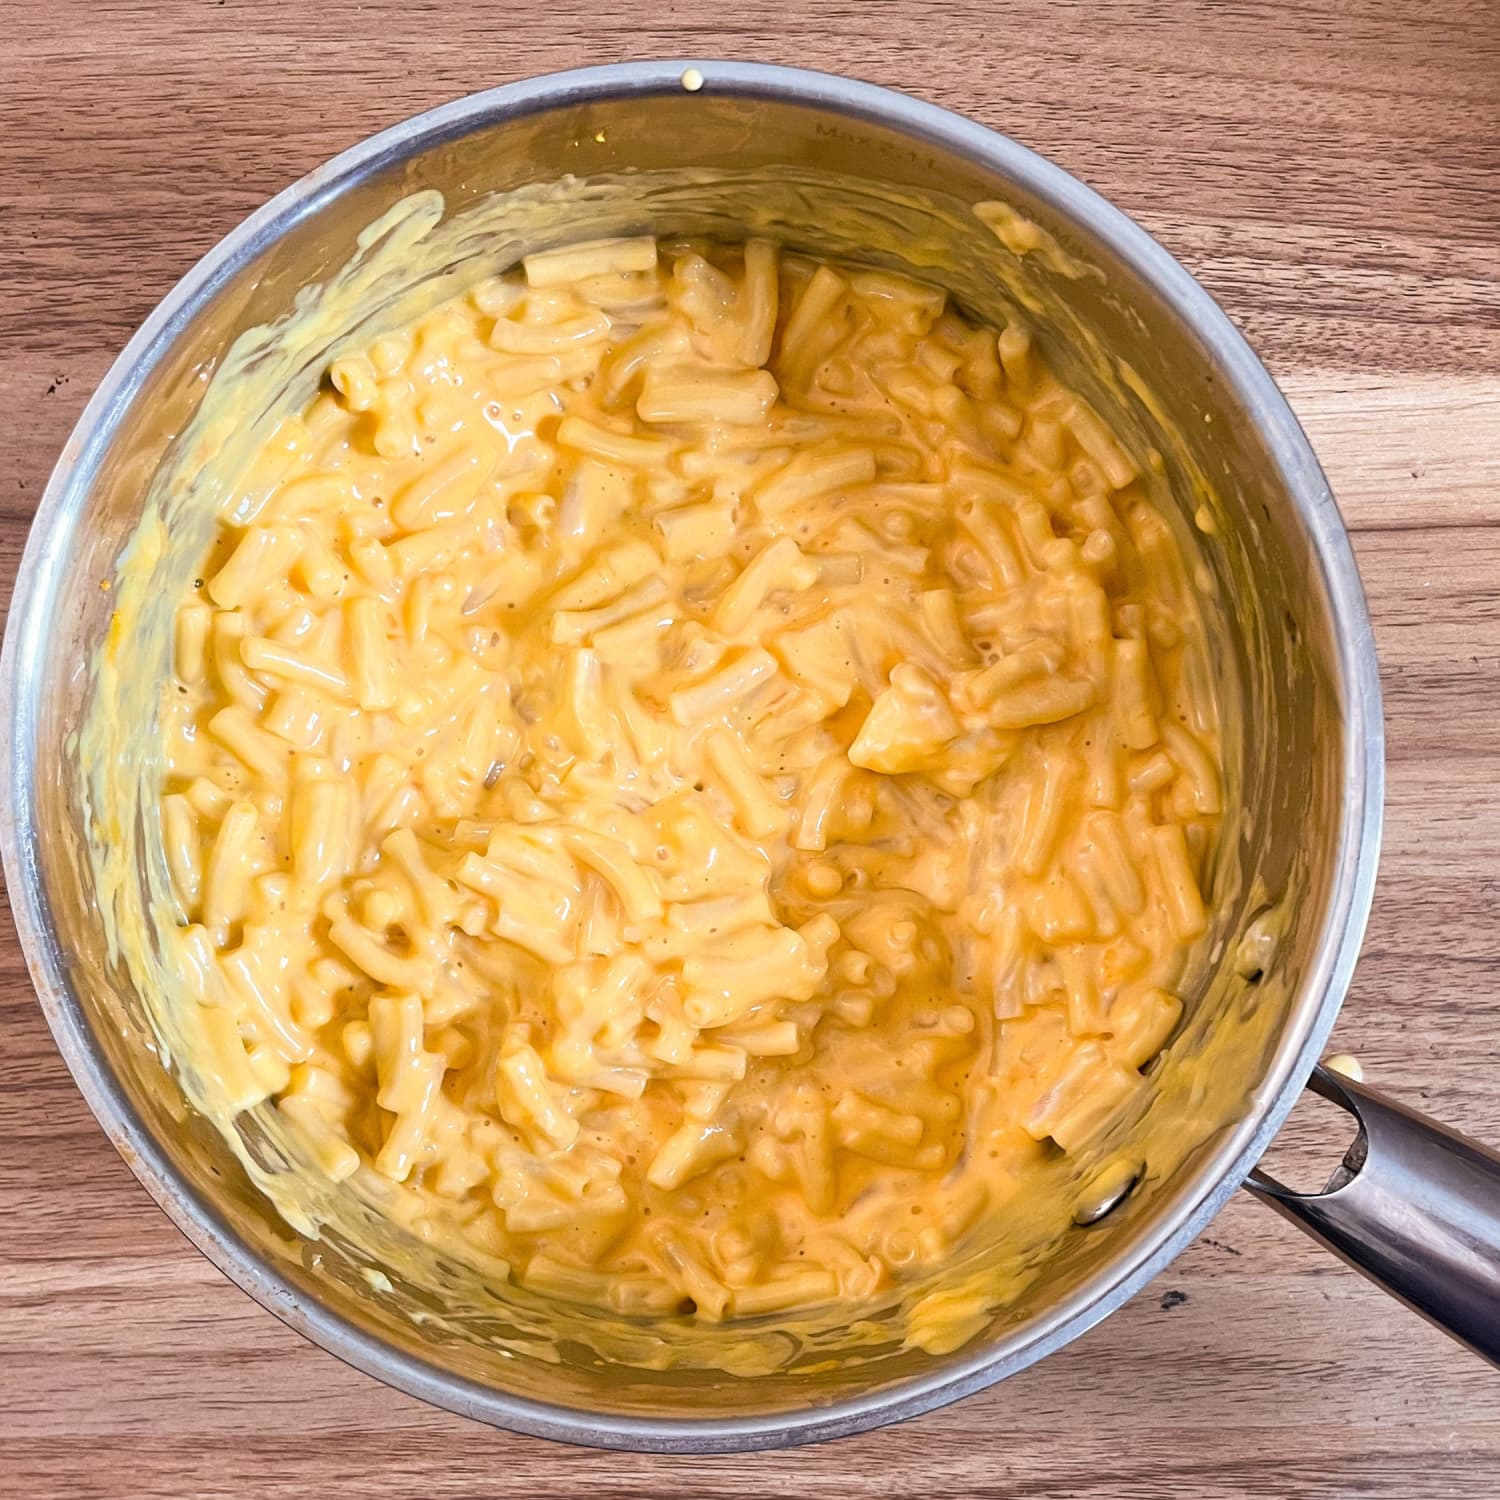 I Tried Blake Lively's Boxed Mac and Cheese Hack